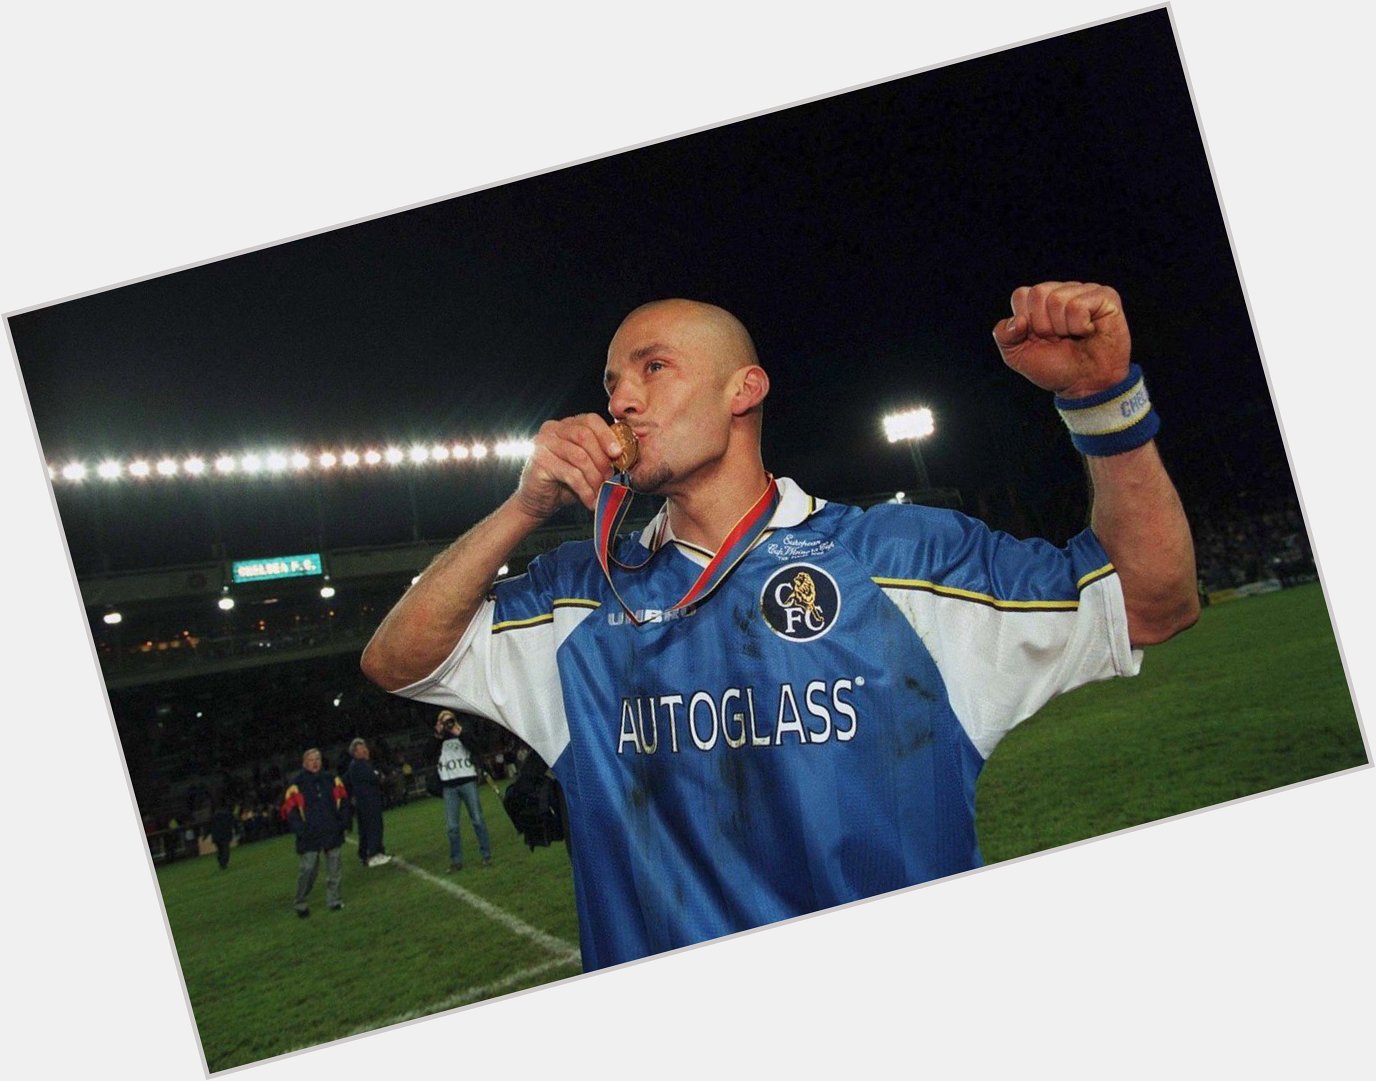 Today we wish a very Happy Birthday to our former striker and manager, Gianluca Vialli. 